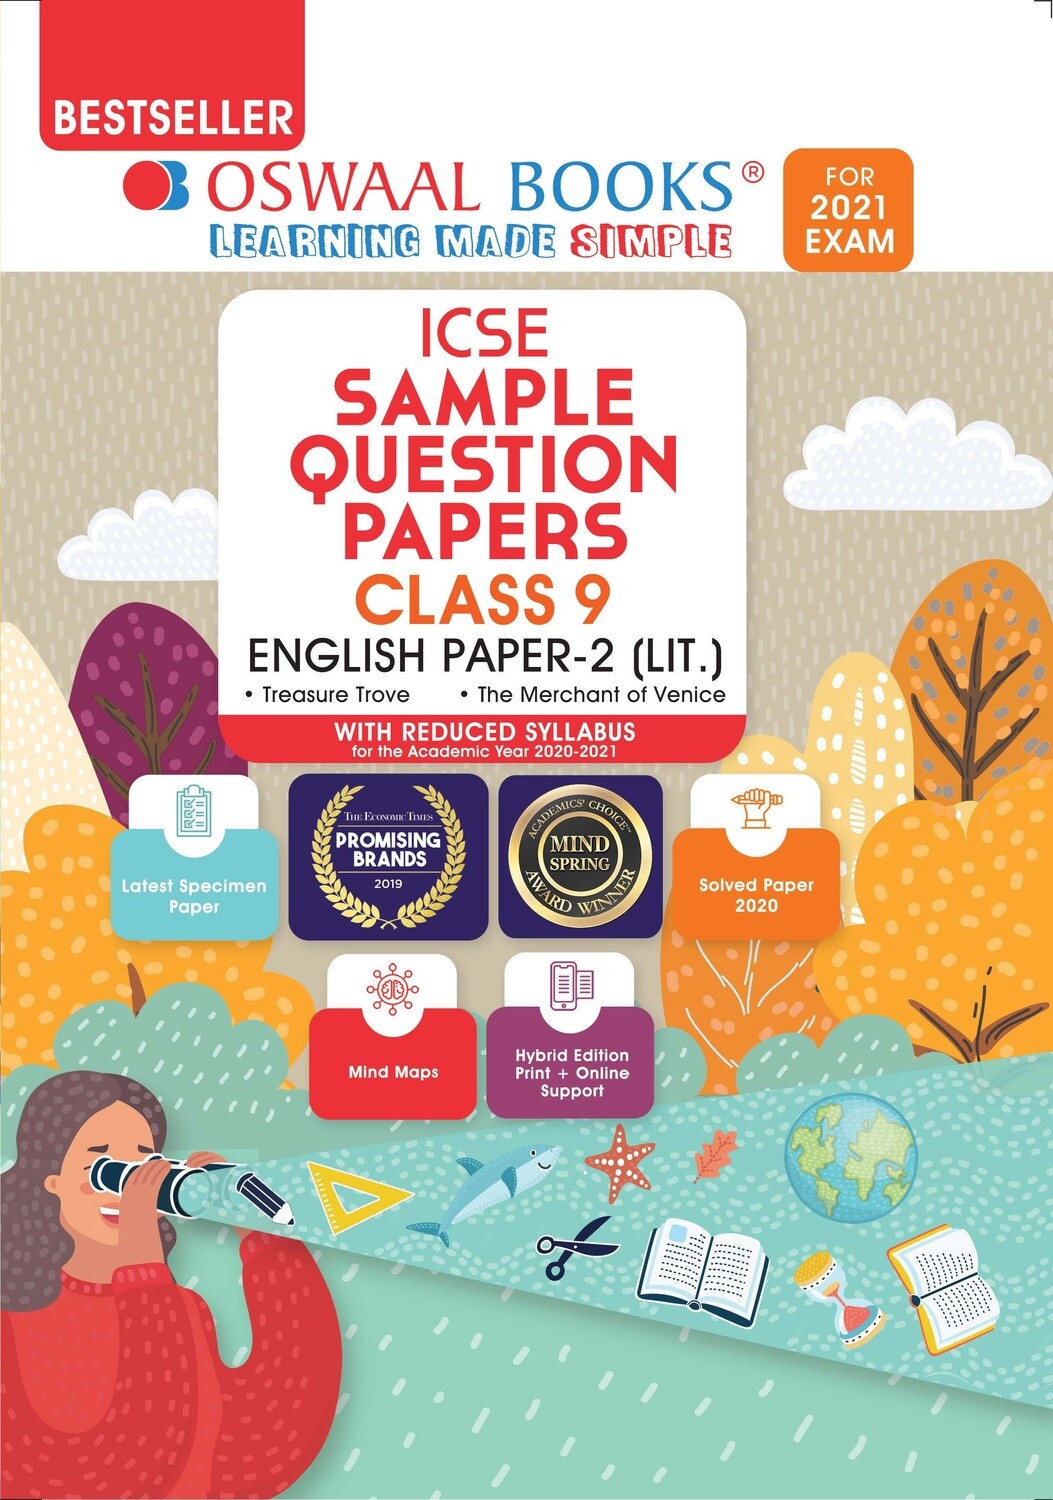 Buy e-book: Oswaal ICSE Sample Question Papers Class 9 English Paper 2 Literature (For 2021 Exam)